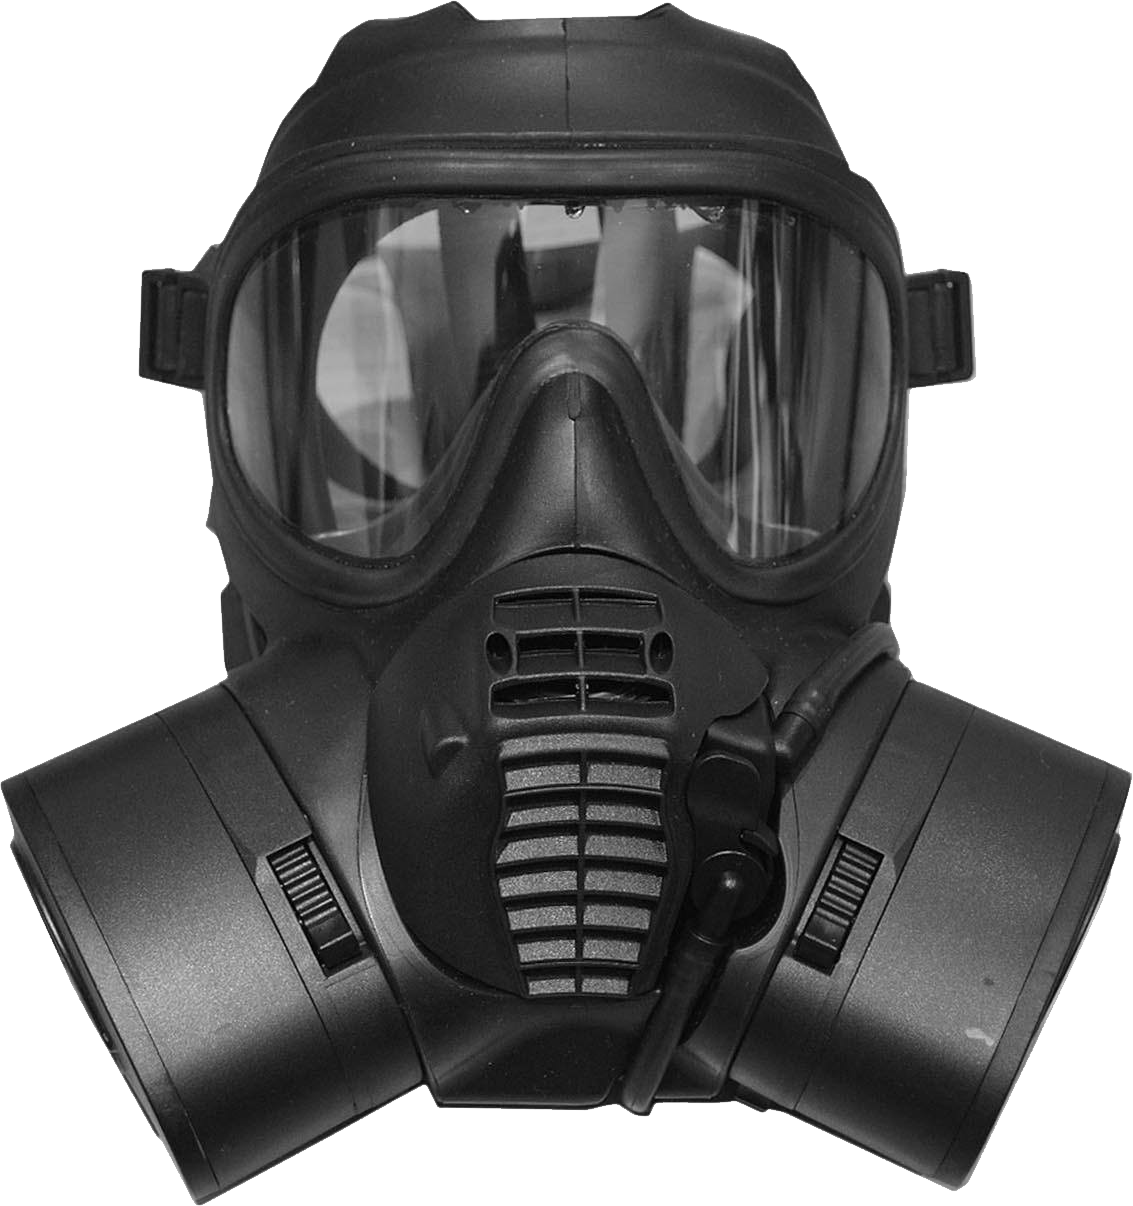 Albums 91+ Pictures Pictures Of Gas Masks Full HD, 2k, 4k